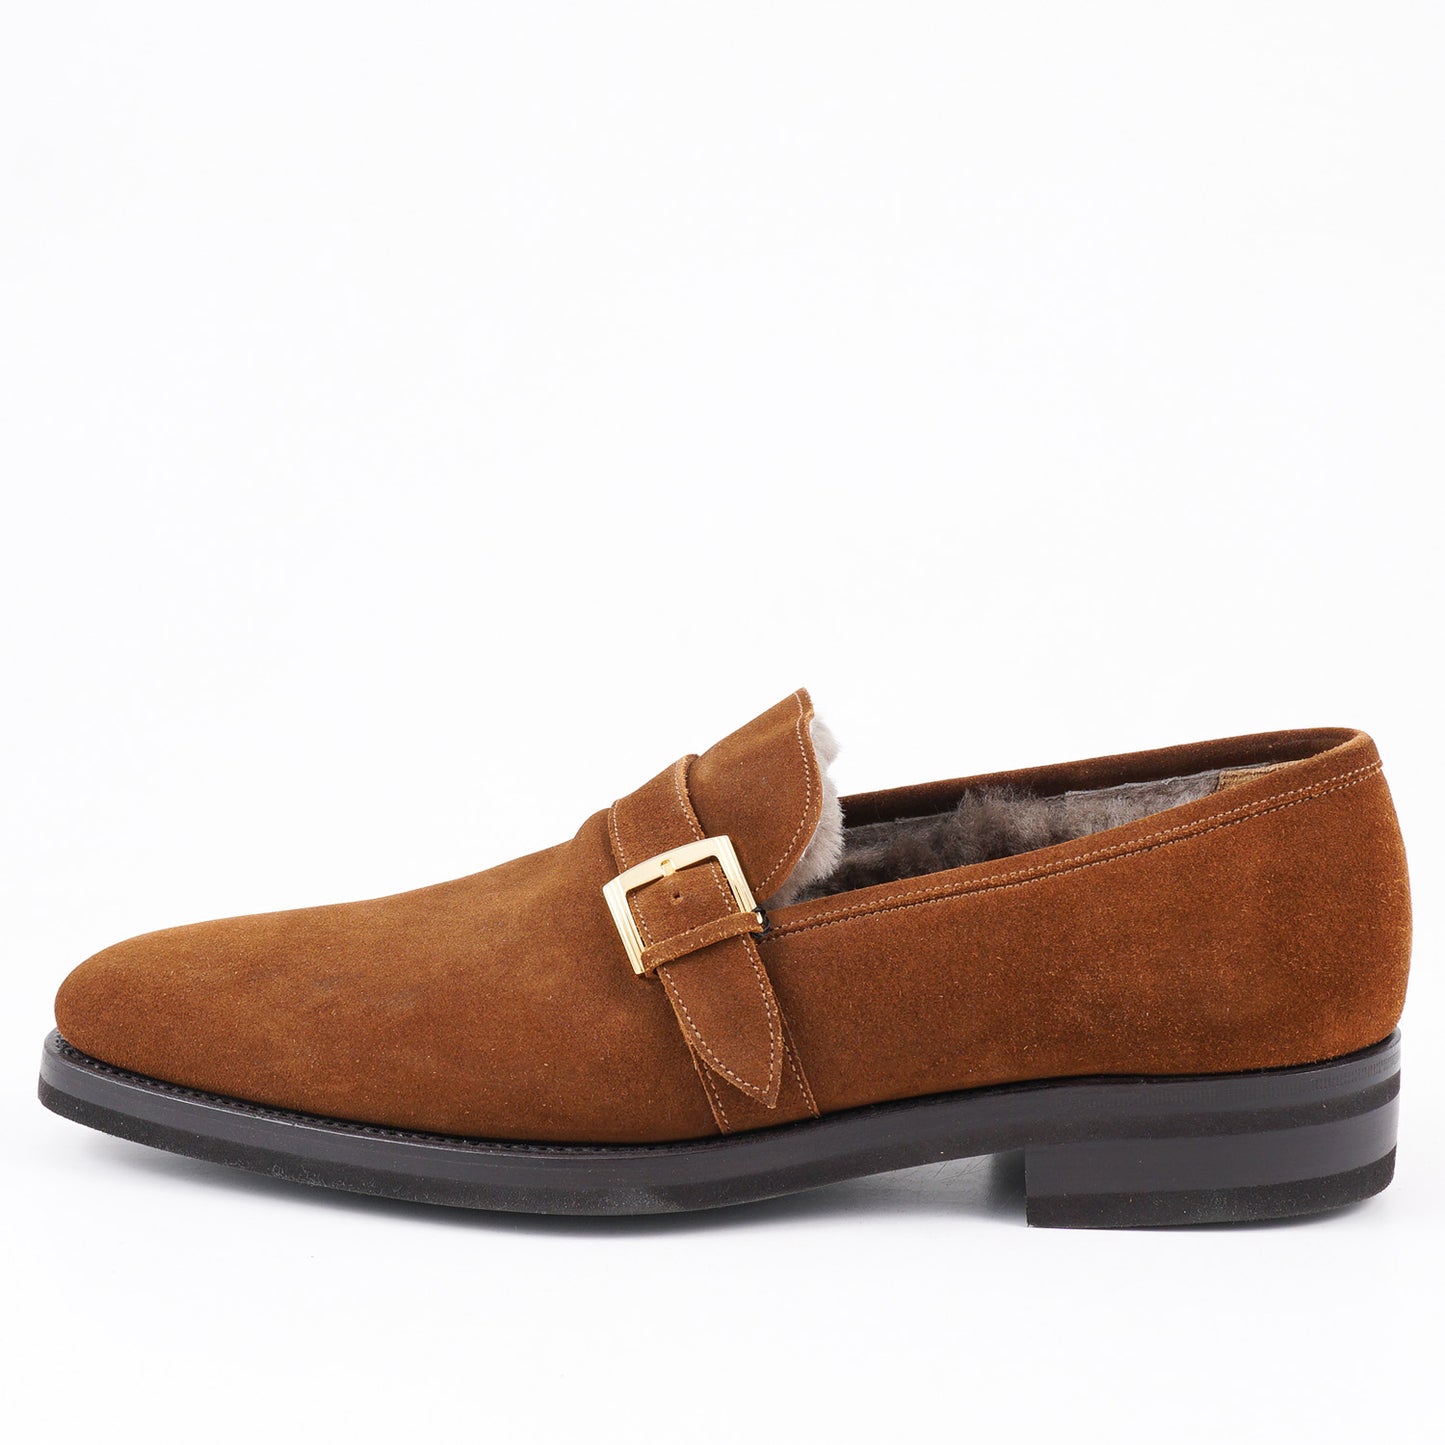 Kiton Shearling-Lined Suede Loafers - Top Shelf Apparel